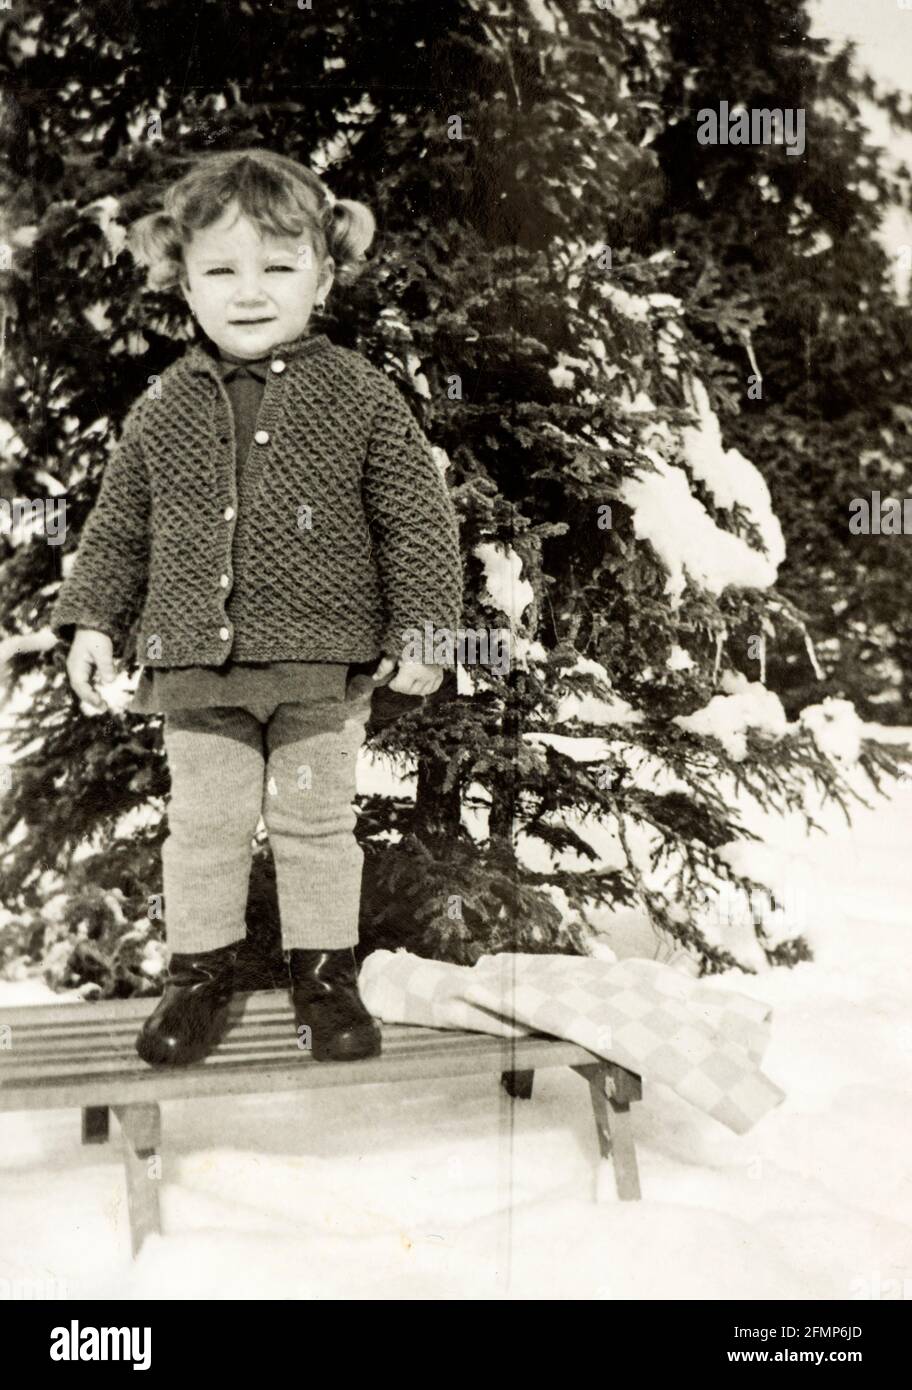 2 years old girl standing on simple wooden sleigh next to a tree in snowy winter c.1970, Bulgaria Stock Photo